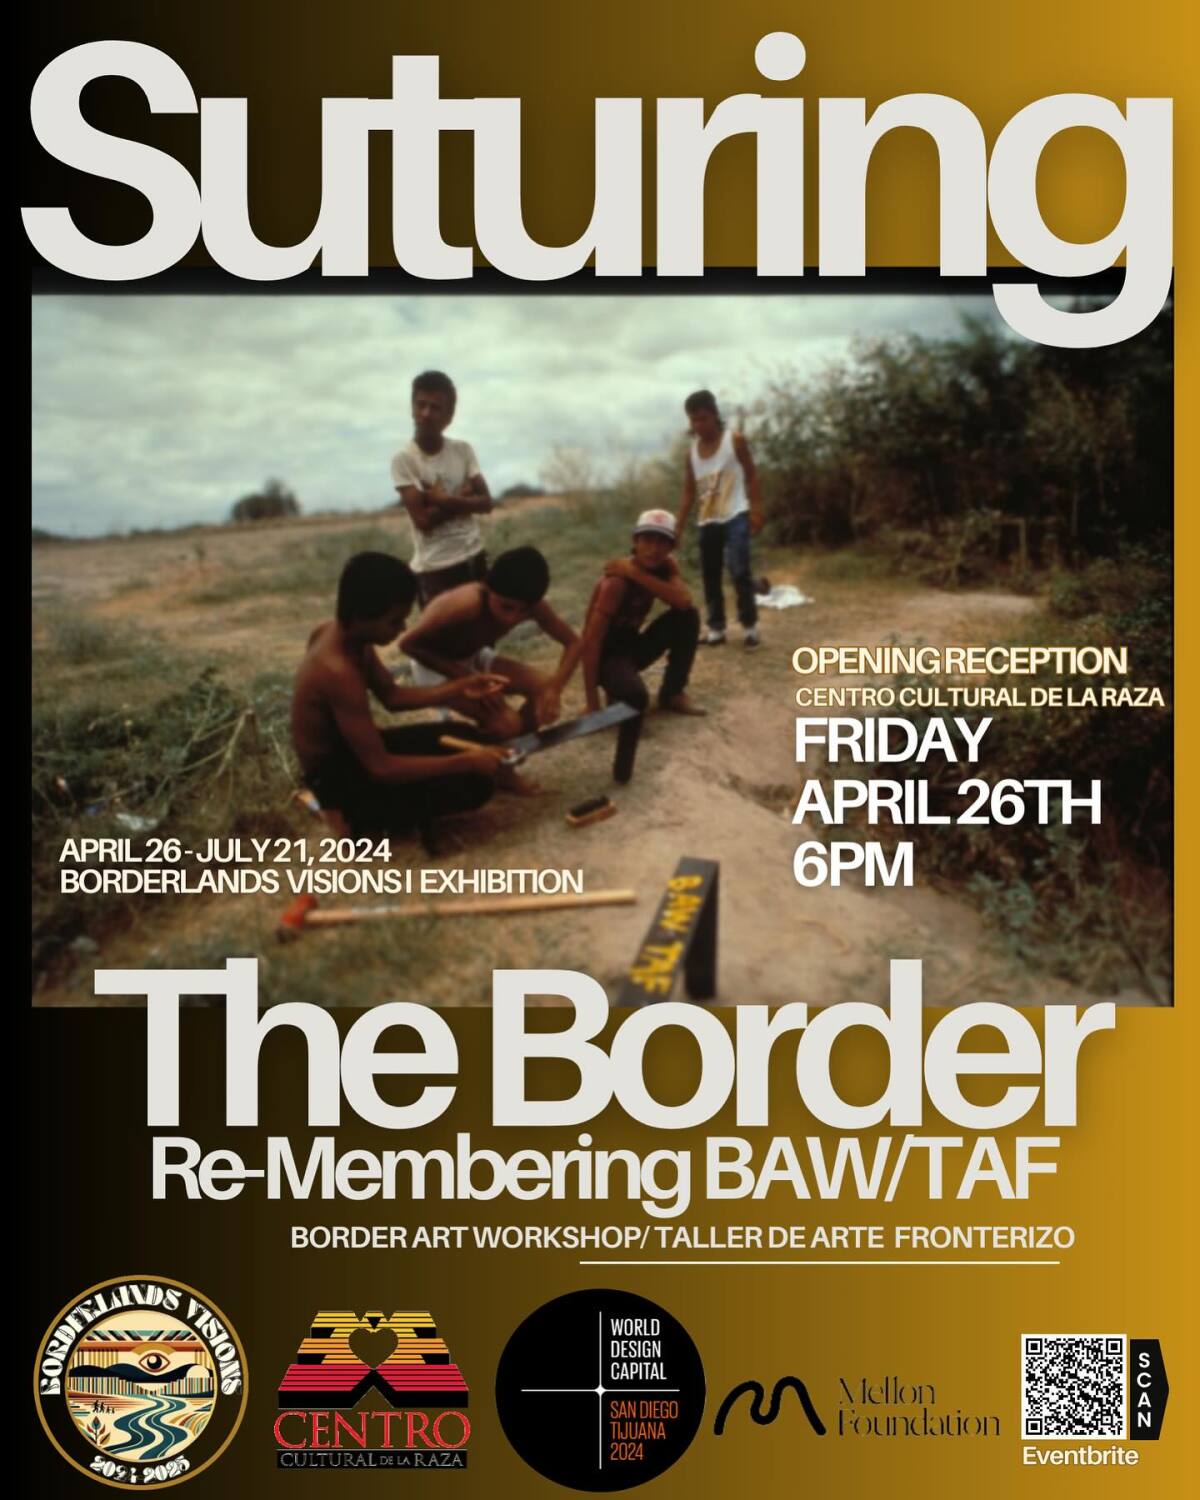 This shows the poster for the "Suturing the Border: Re-Membering BAW/TAF" exhibit.